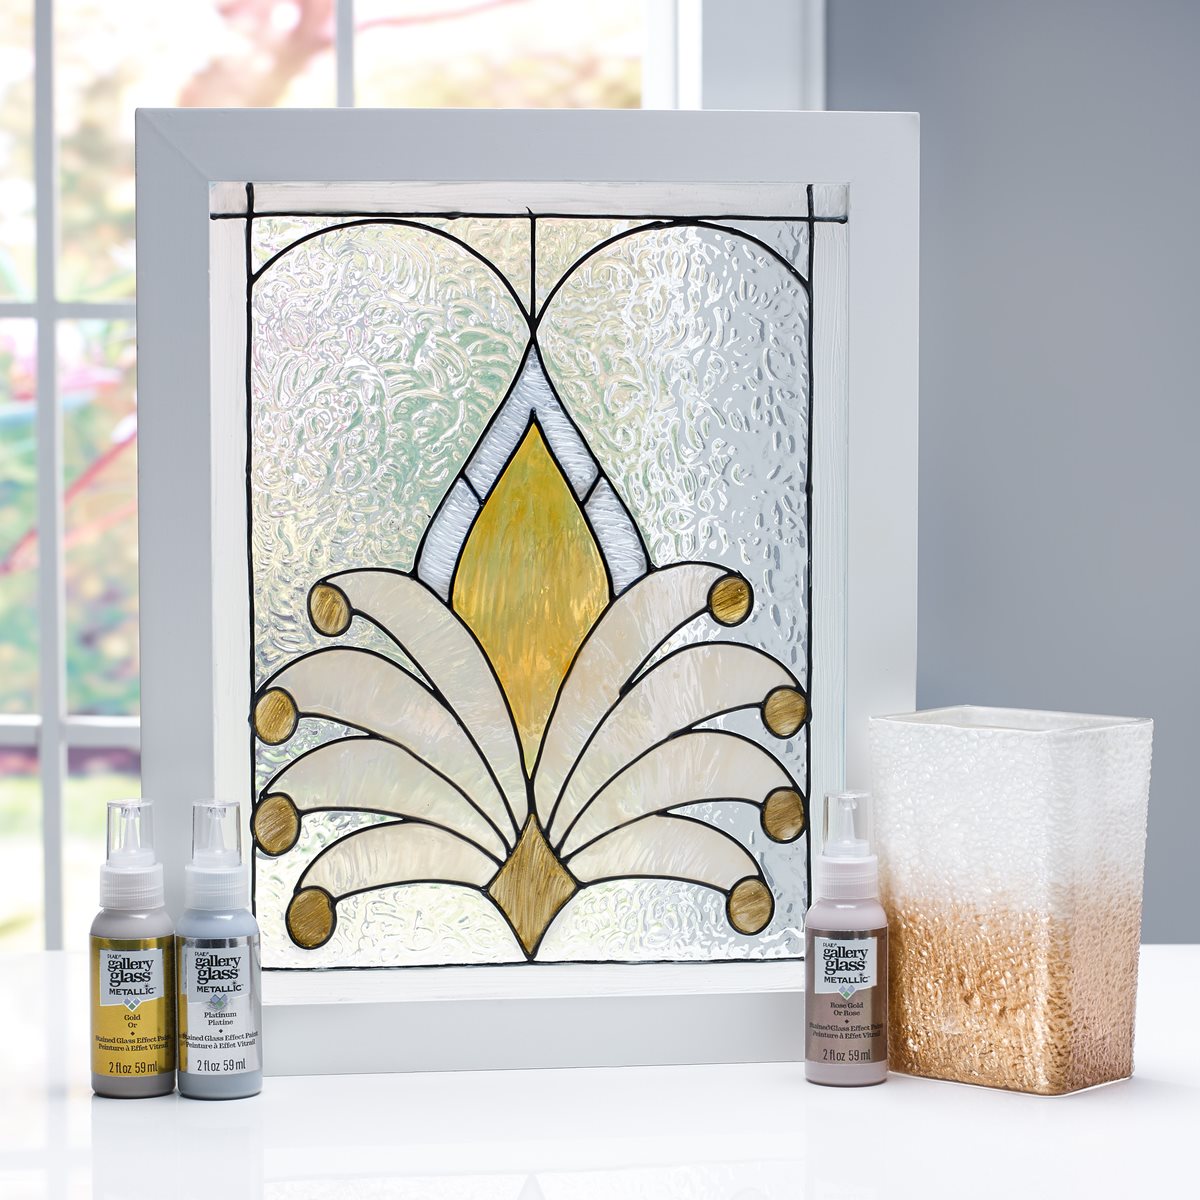 Gallery Glass Gold and White Architectural Design